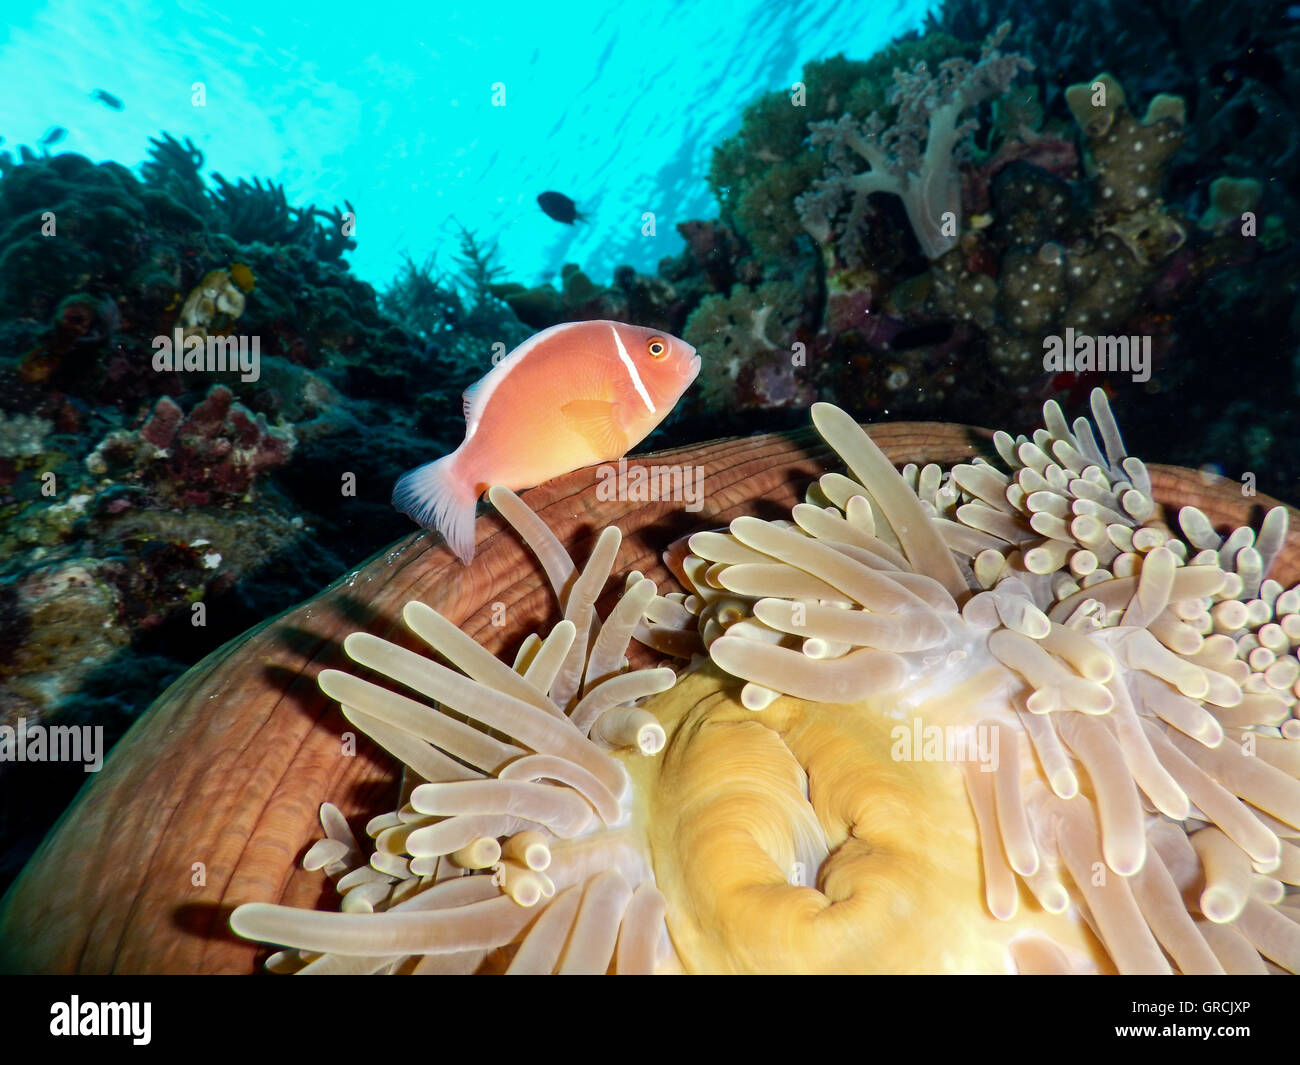 Anemone Fish With Anemone Heteractis Magnifica In The Foreground, Reef And Surface Of Water In The Backgroundselayar, South Sulawesi Stock Photo